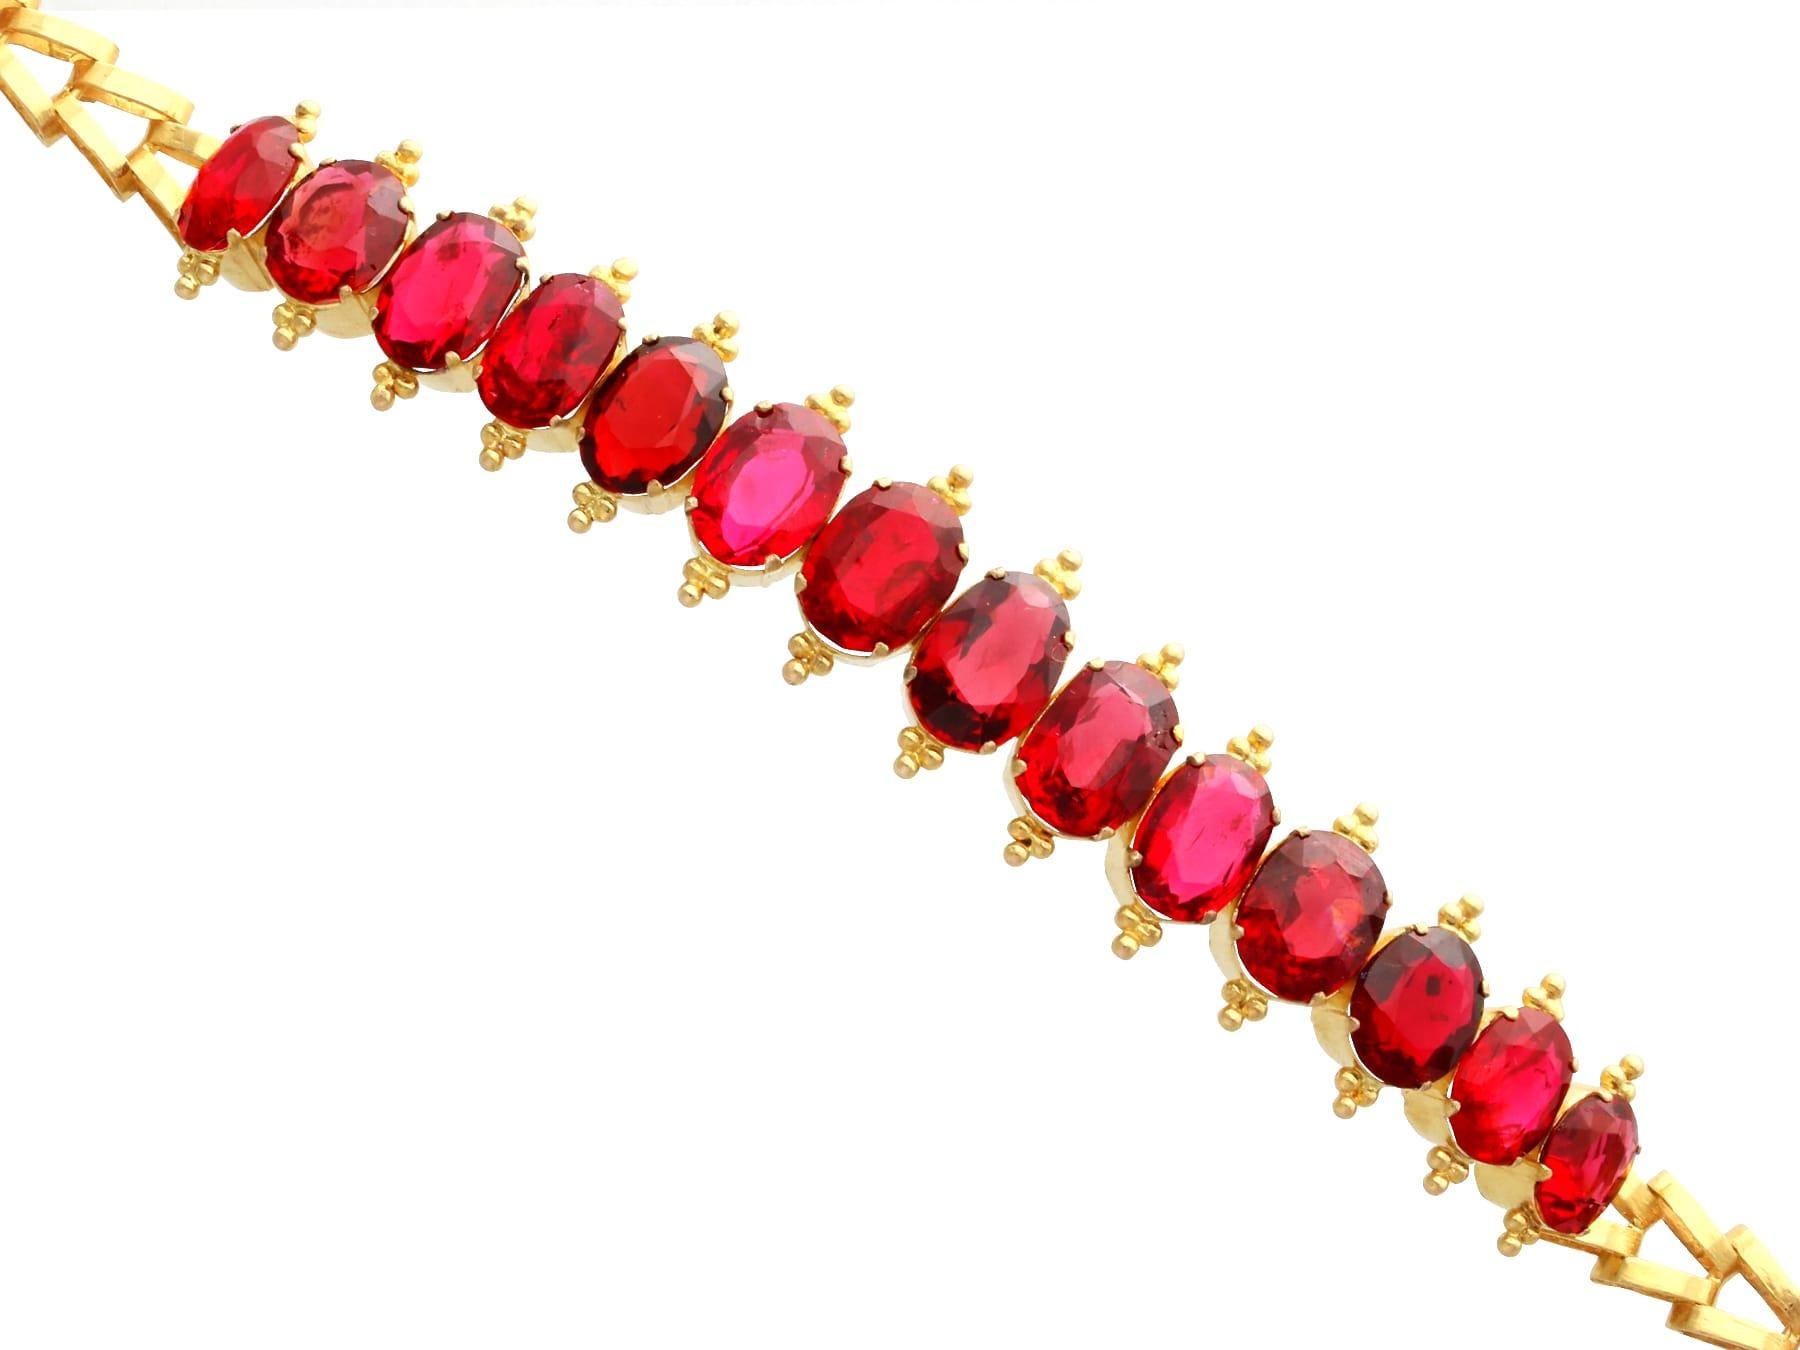 Oval Cut 1890s Victorian 23.80 Carat Red Spinel and 18k Yellow Gold Bracelet